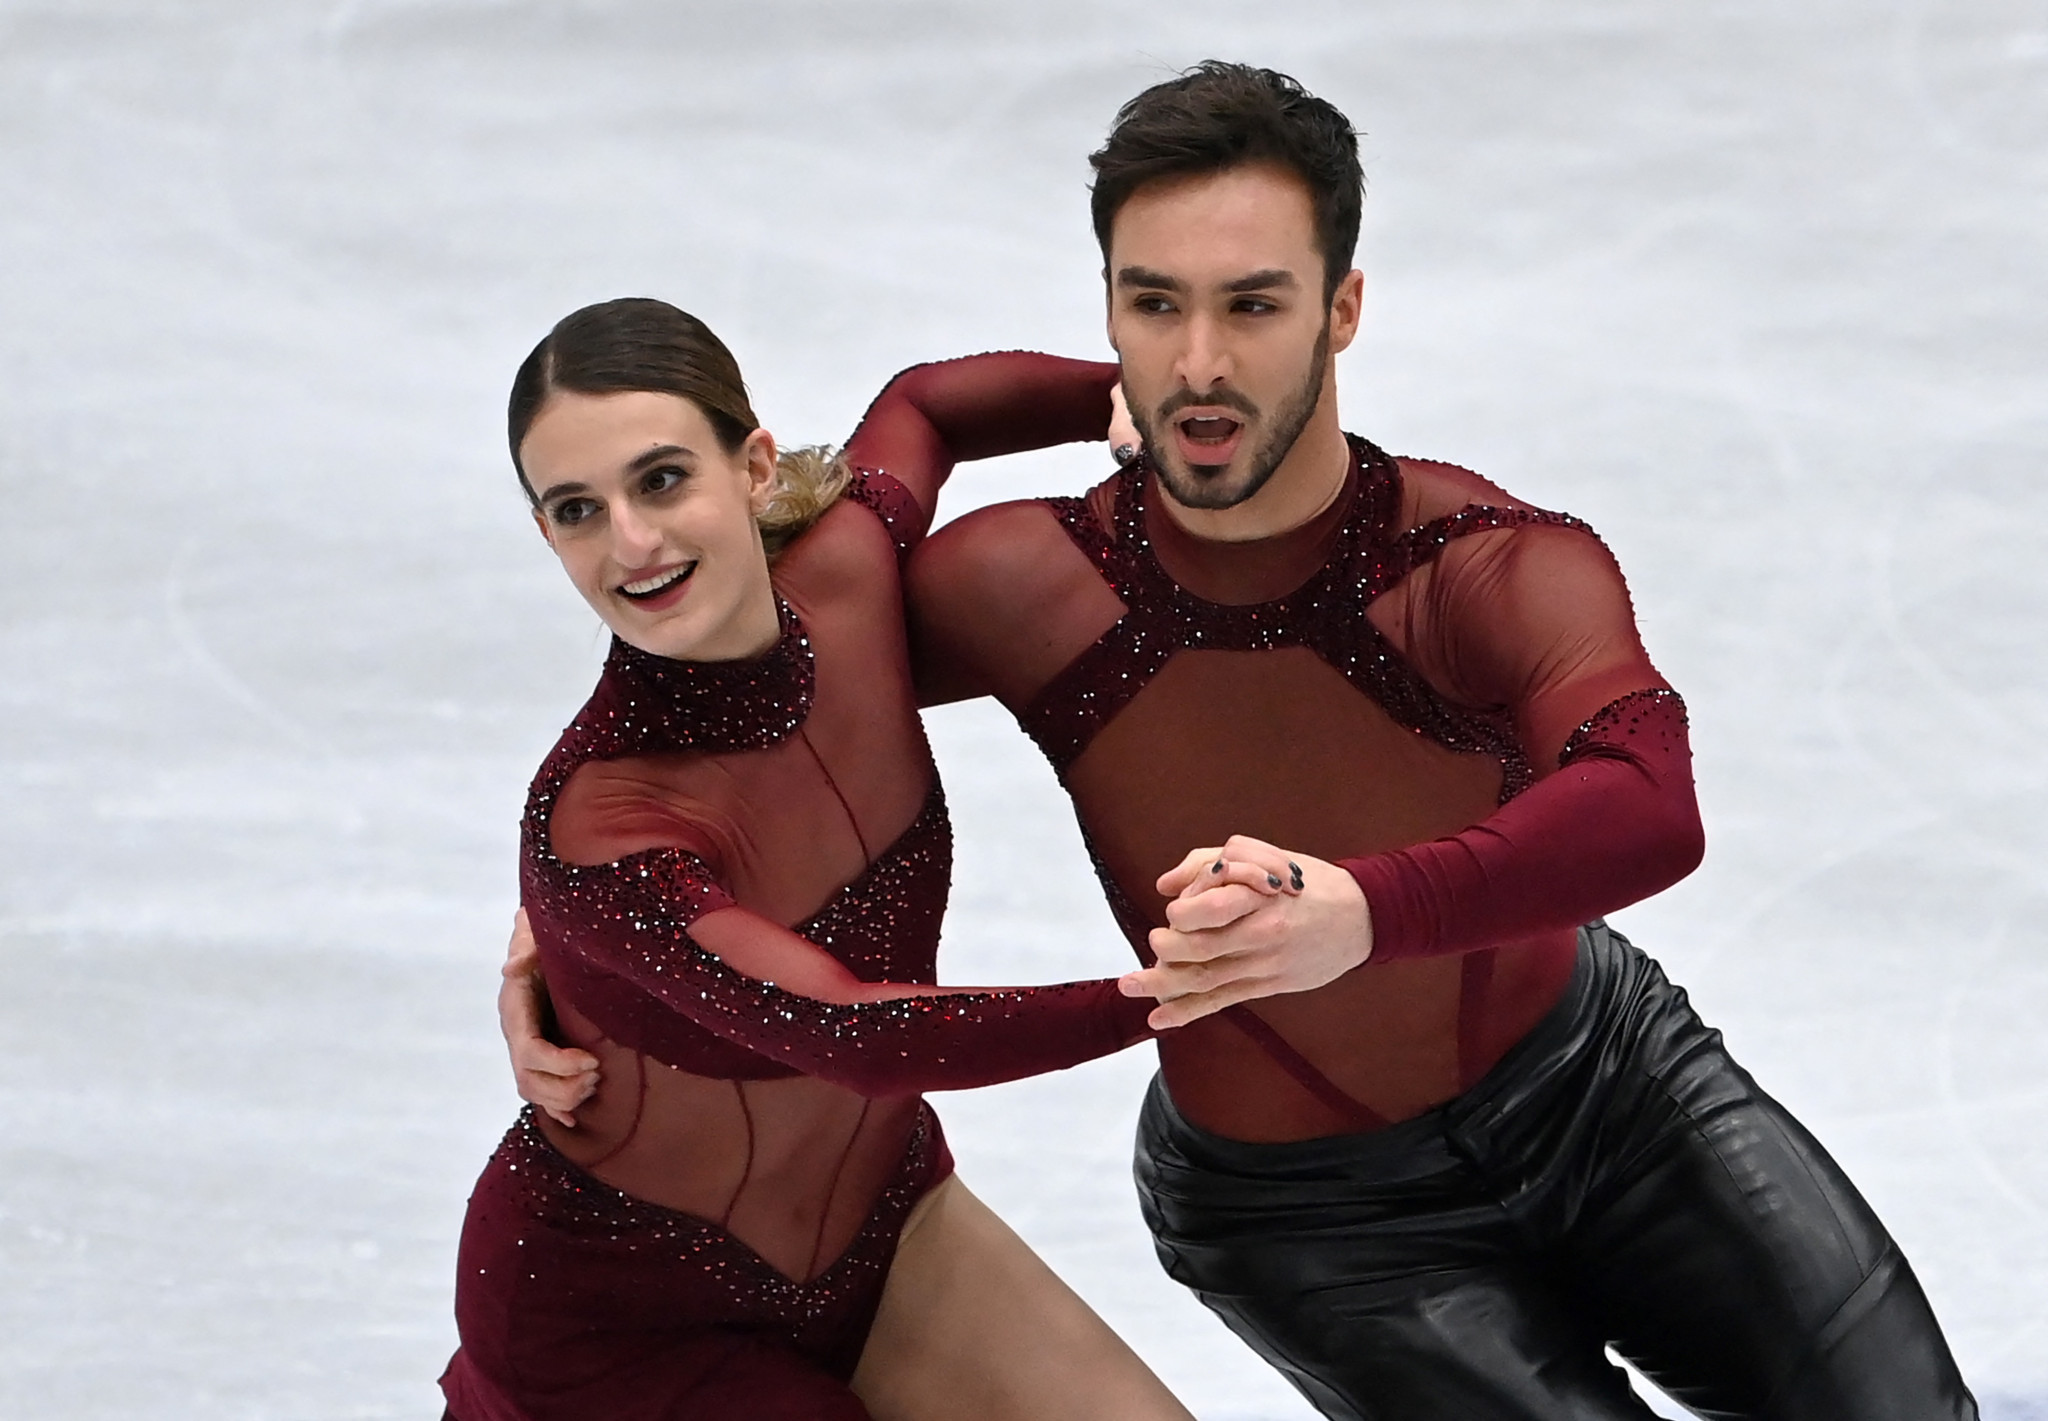 Gabriella Papadakis, left, and Guillaume Cizeron are set to take a break from competitive figure skating ©Getty Images